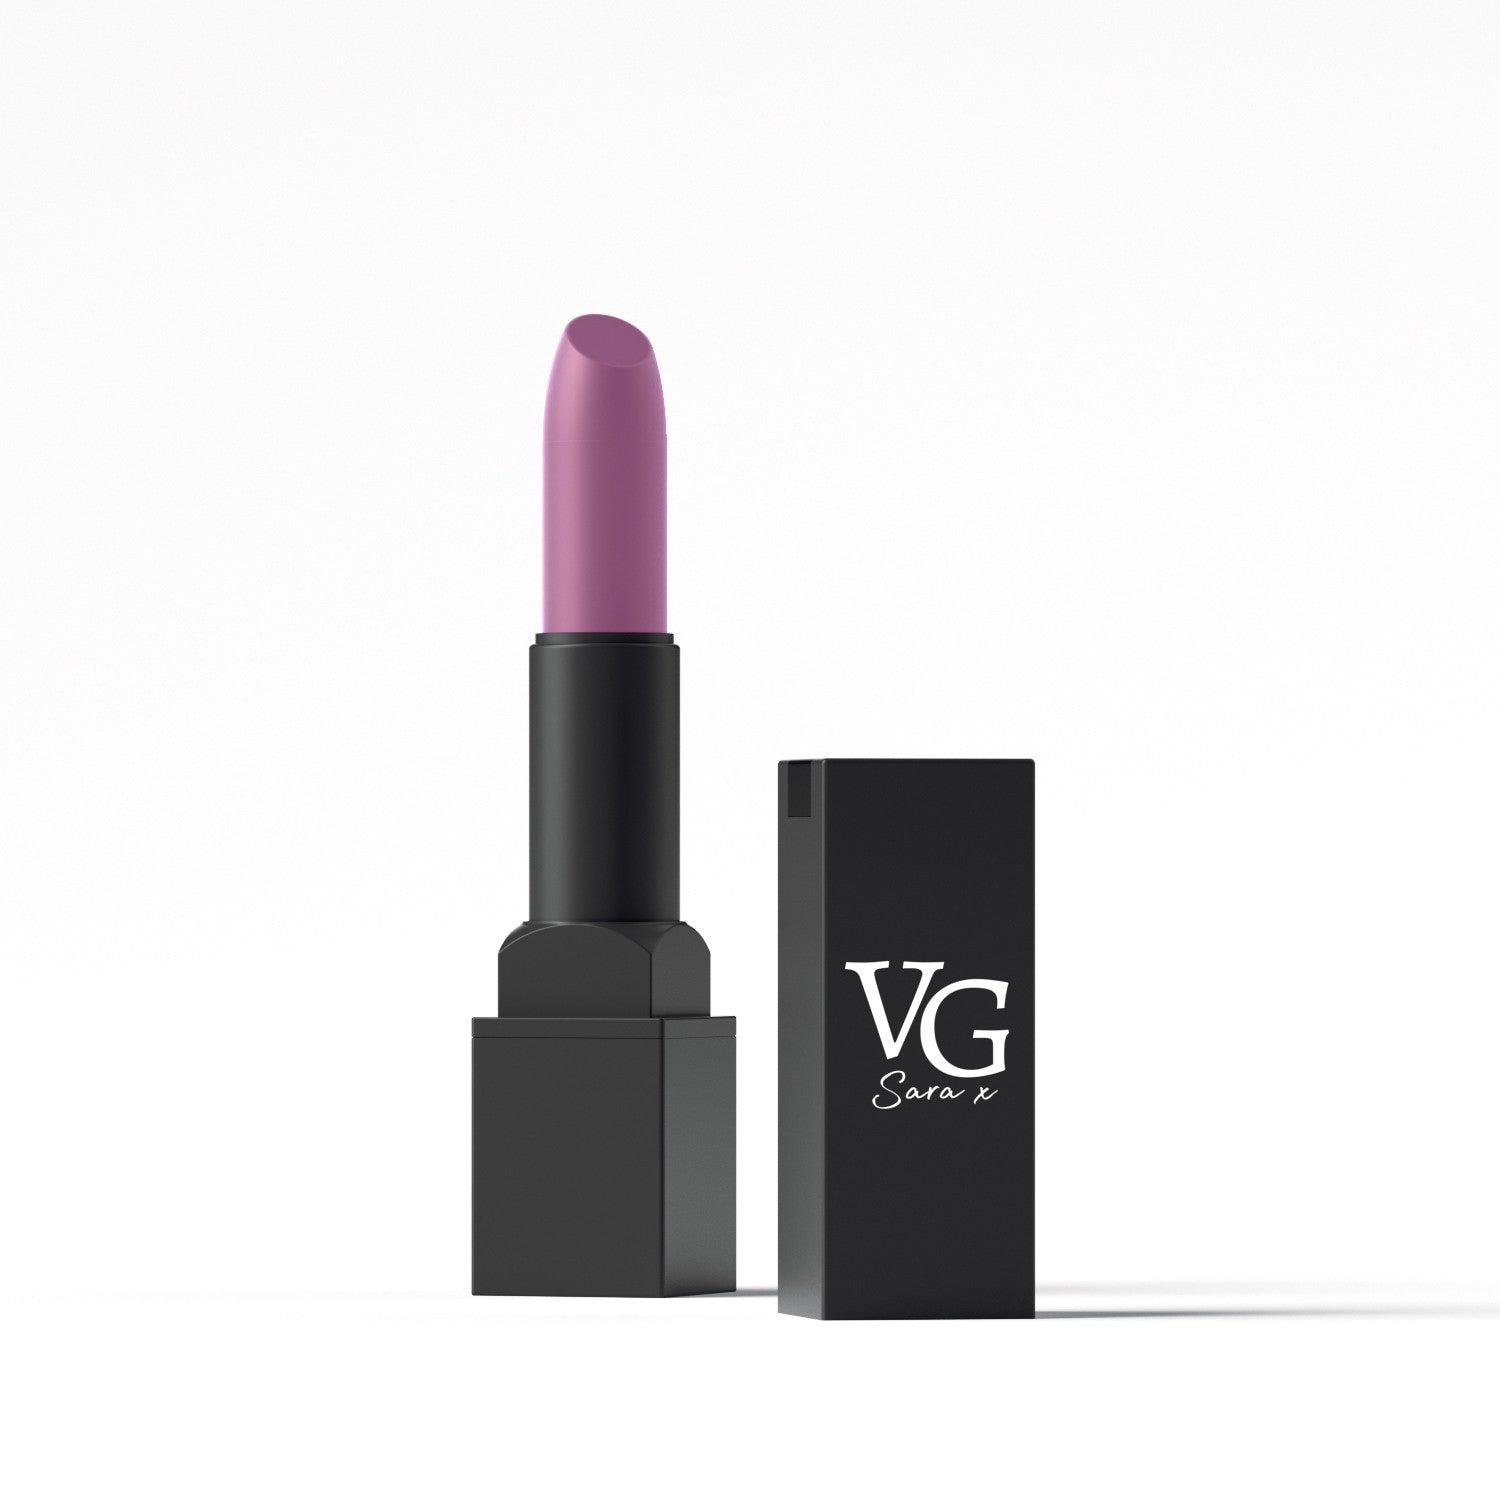 Close-up of VG Cosmetics vitamin-enriched lipstick within its tube